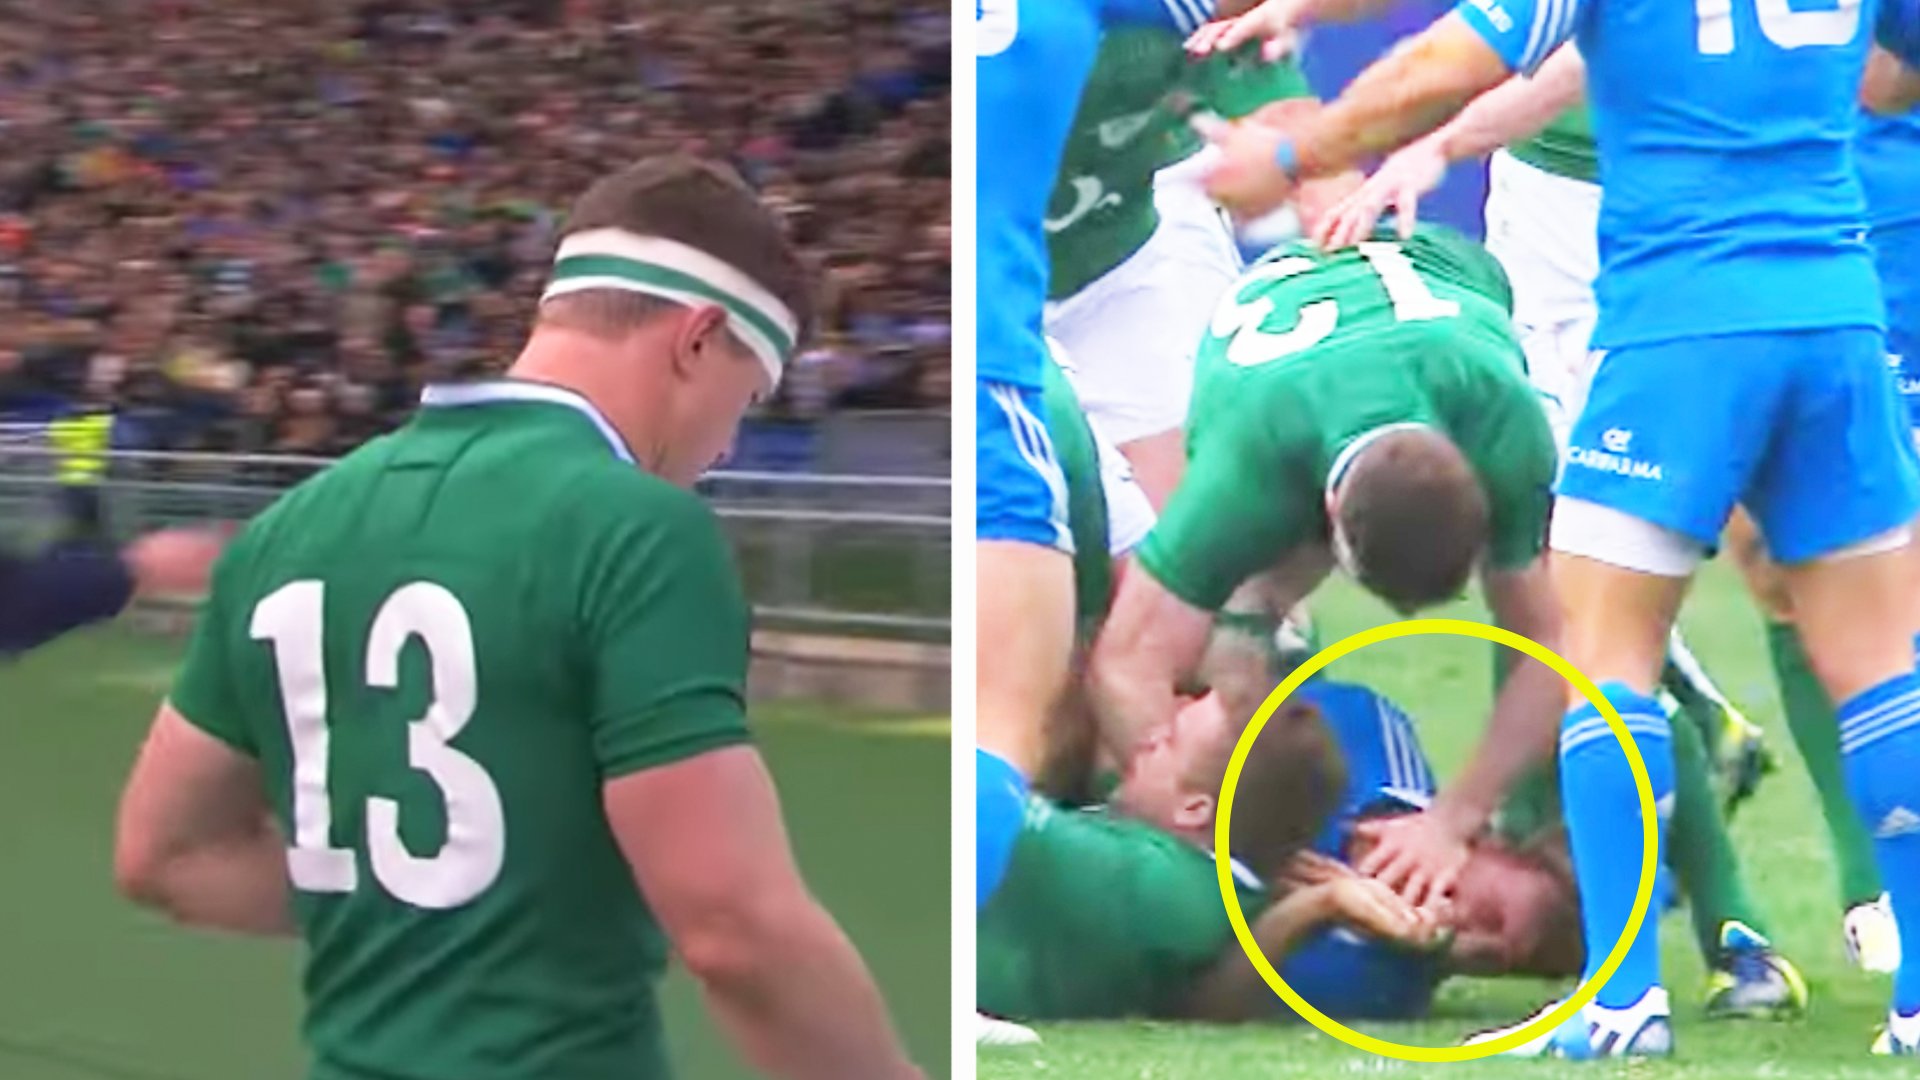 The out of character act by Brian O'Driscoll that blotted his otherwise clean record